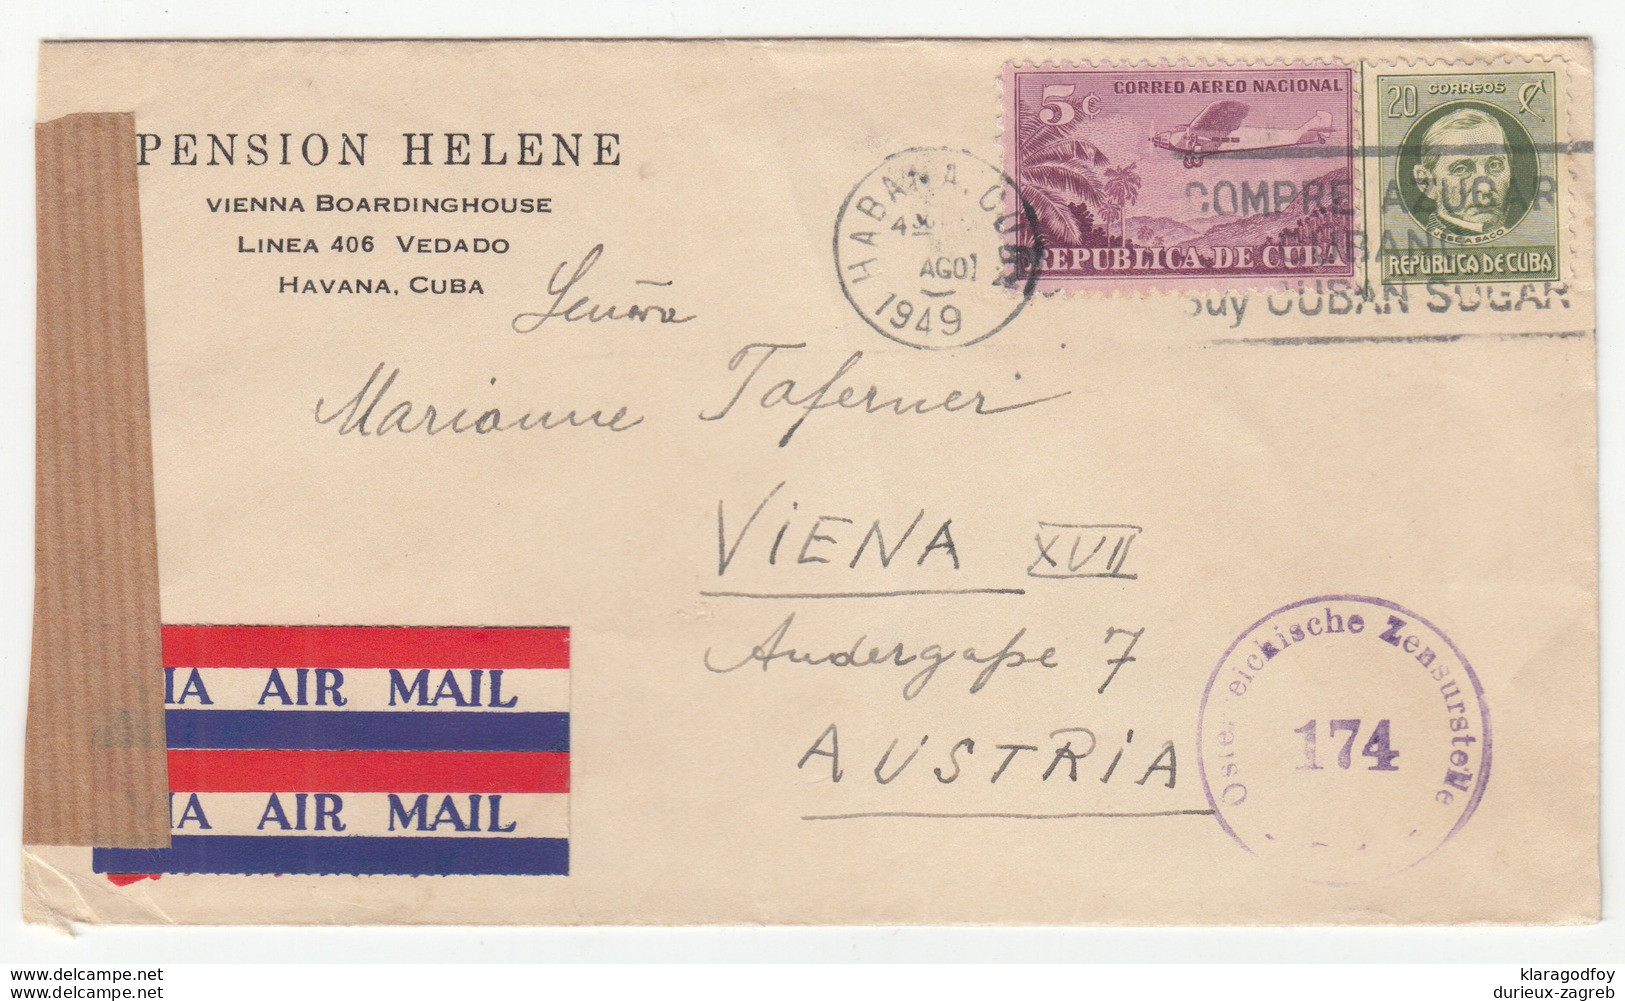 Pension Helene Company Letter Cover Travelled Air Mail 1949 To Austria - Censored B170915 - Poste Aérienne